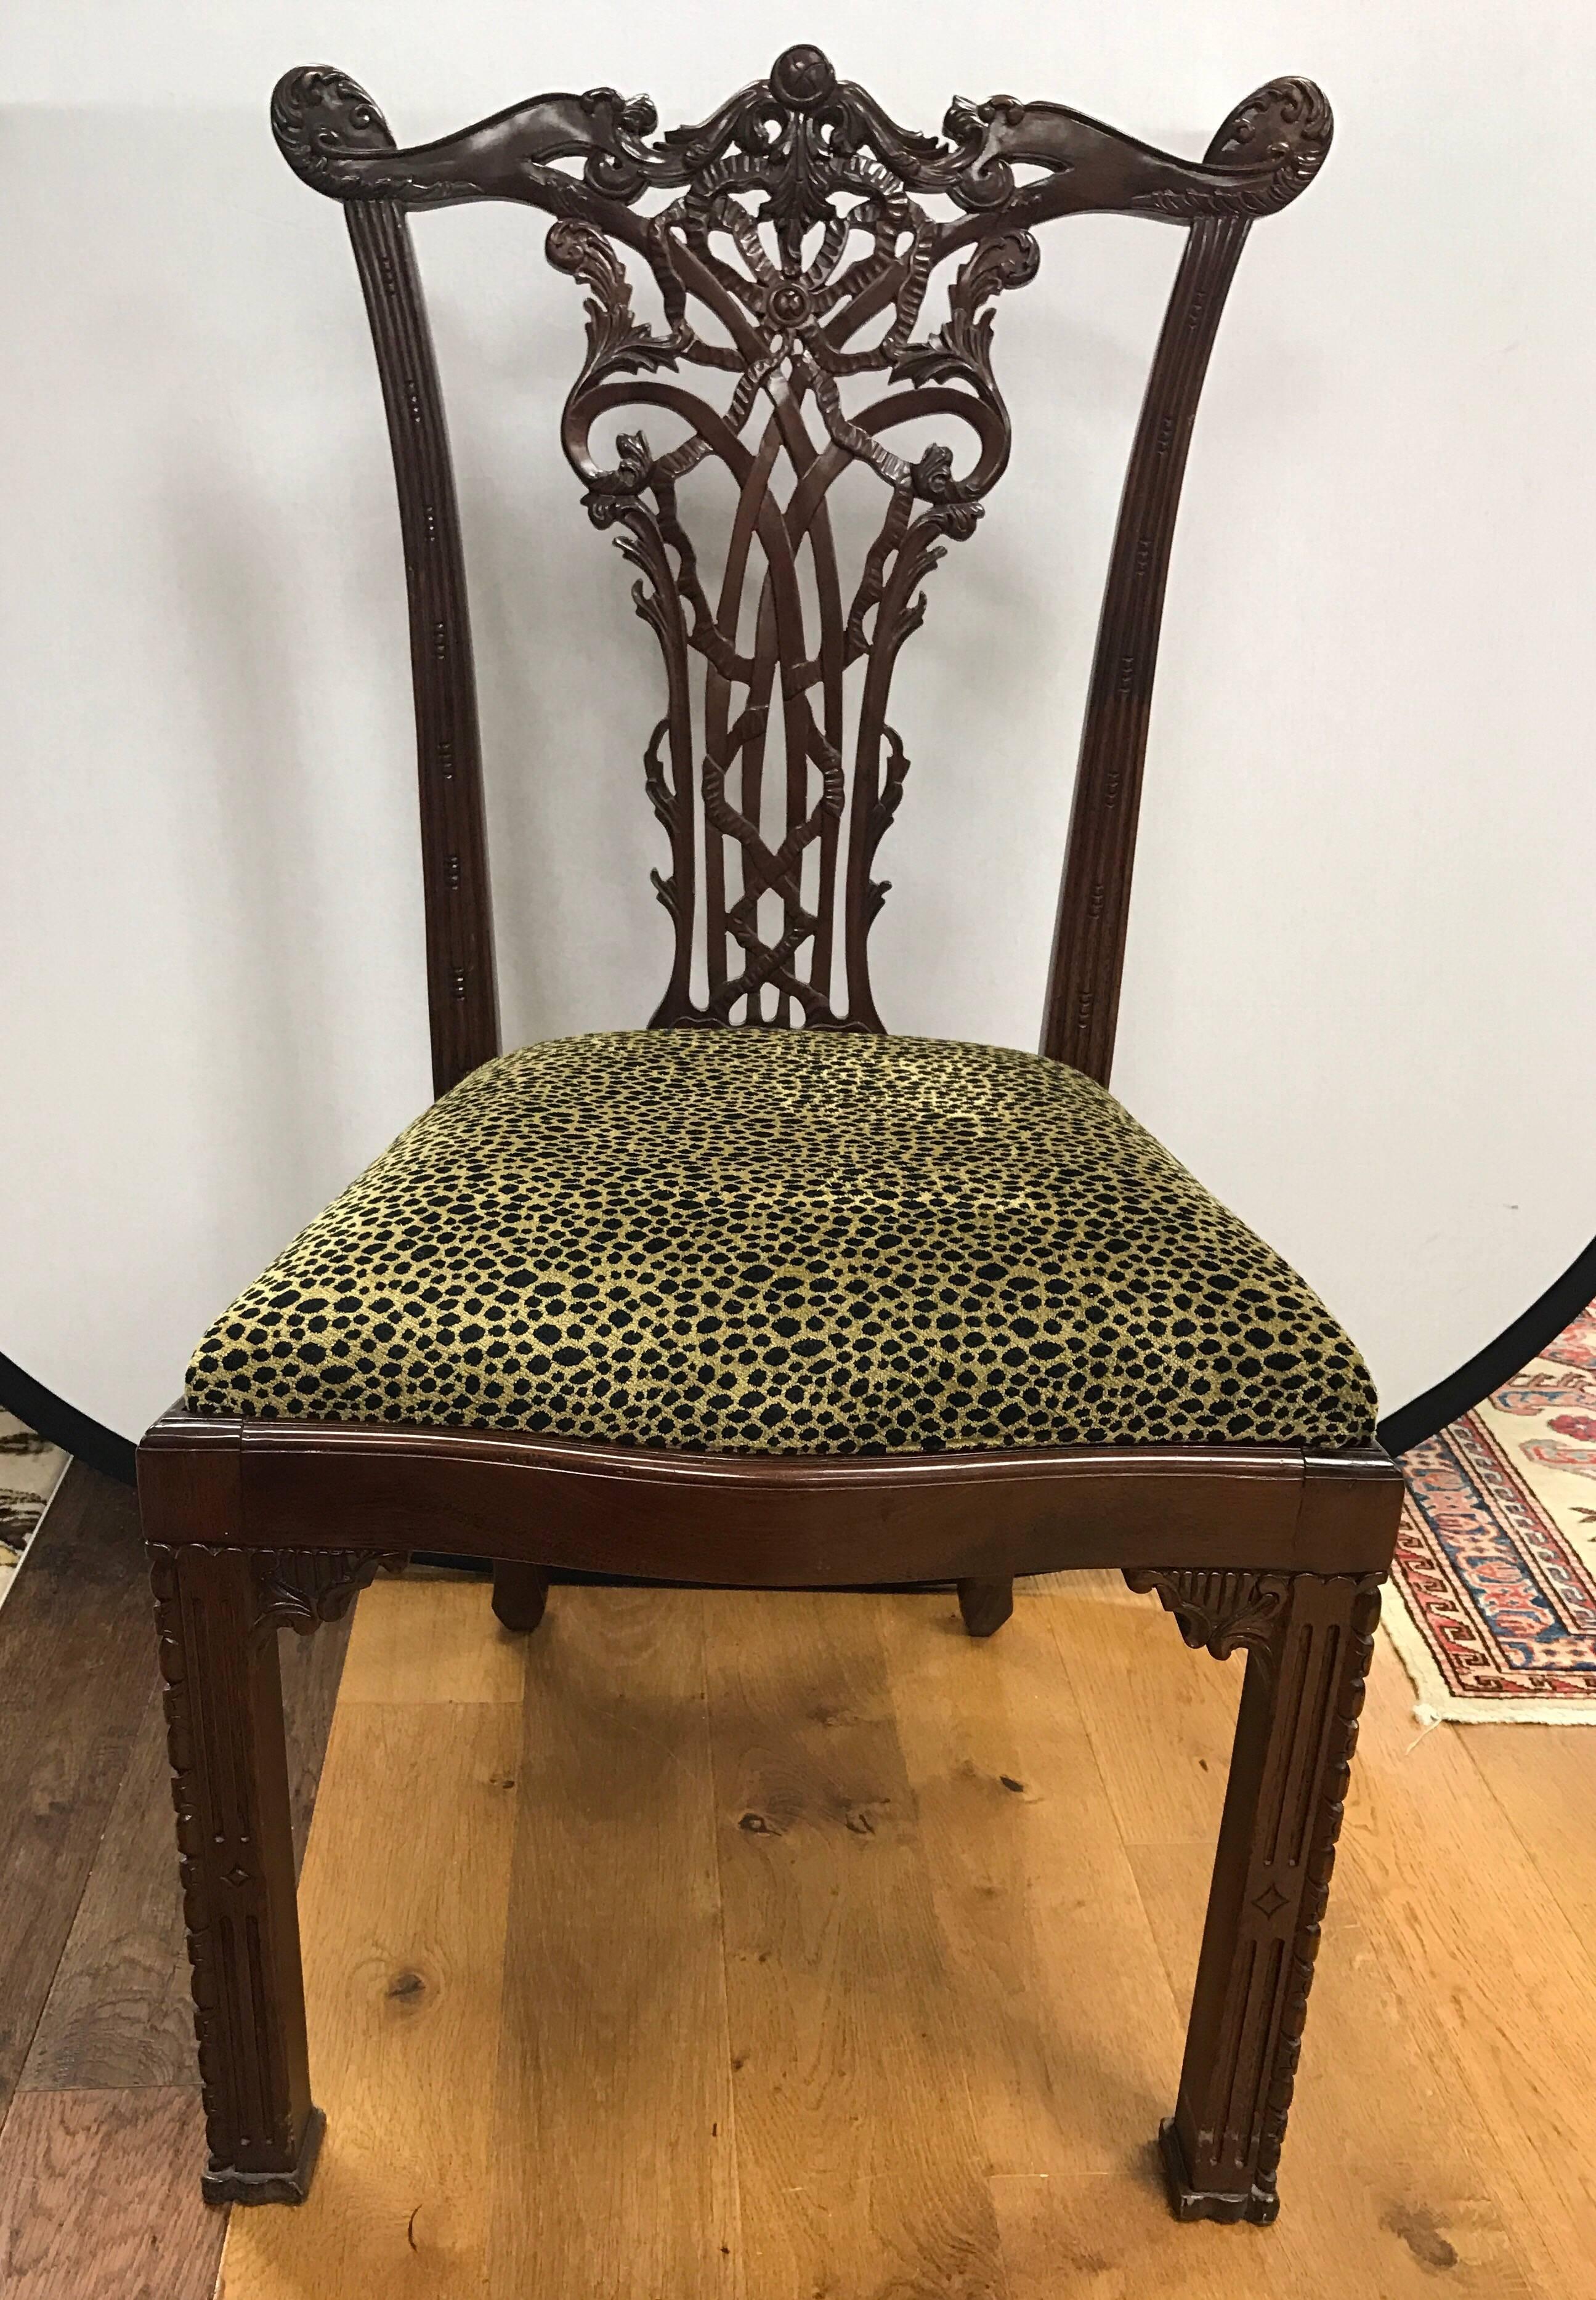 A very fine set of 19th century Chippendale mahogany dining chairs of superb quality and generous proportions with intricately carved back splat and blind fretwork on front legs. Includes eight side chairs and two armchairs. Drop in seats are easy